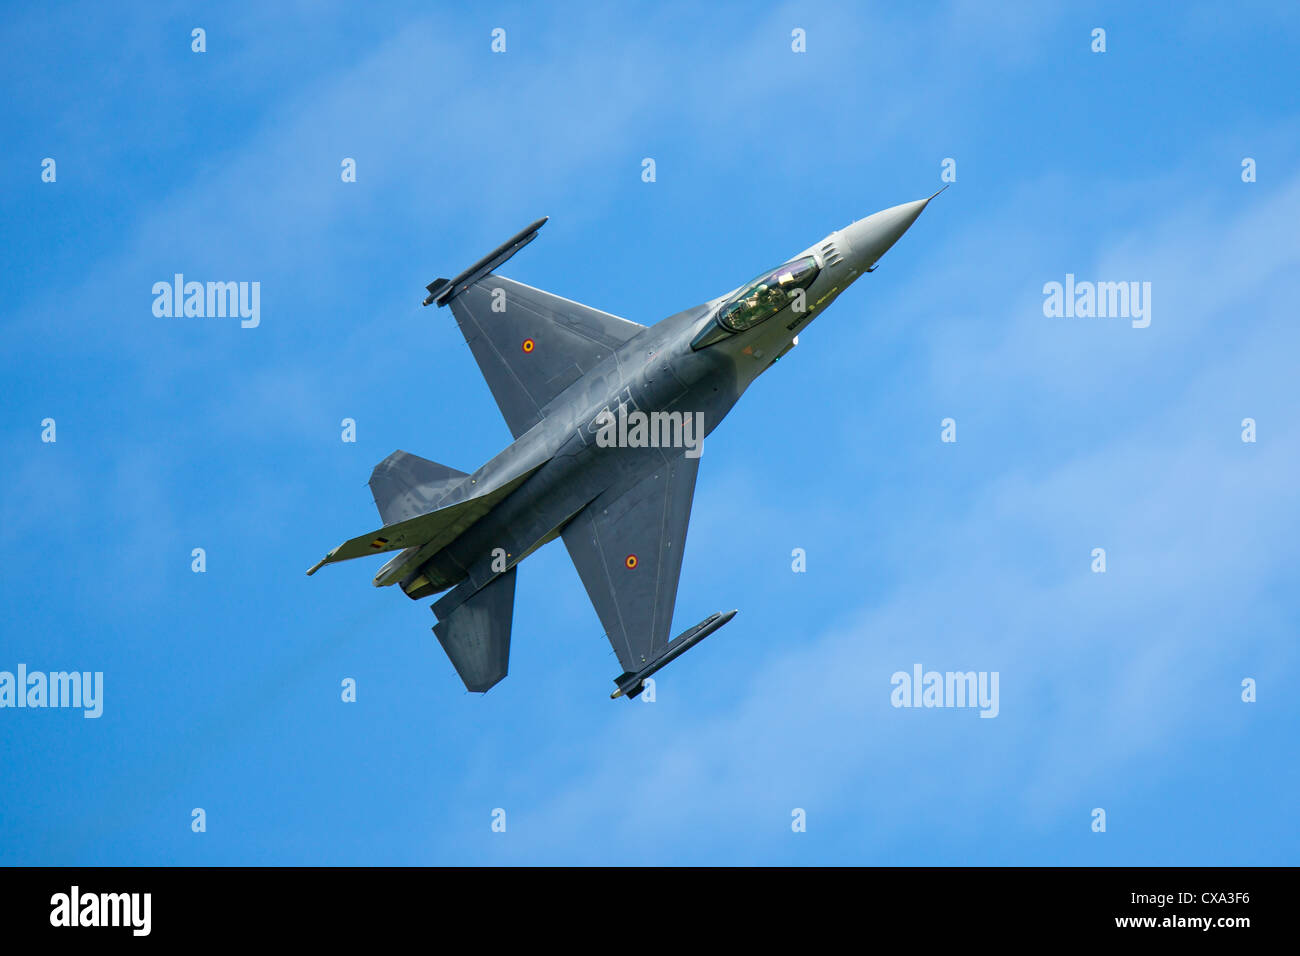 An F-16 figher jet performs at an airshow Stock Photo